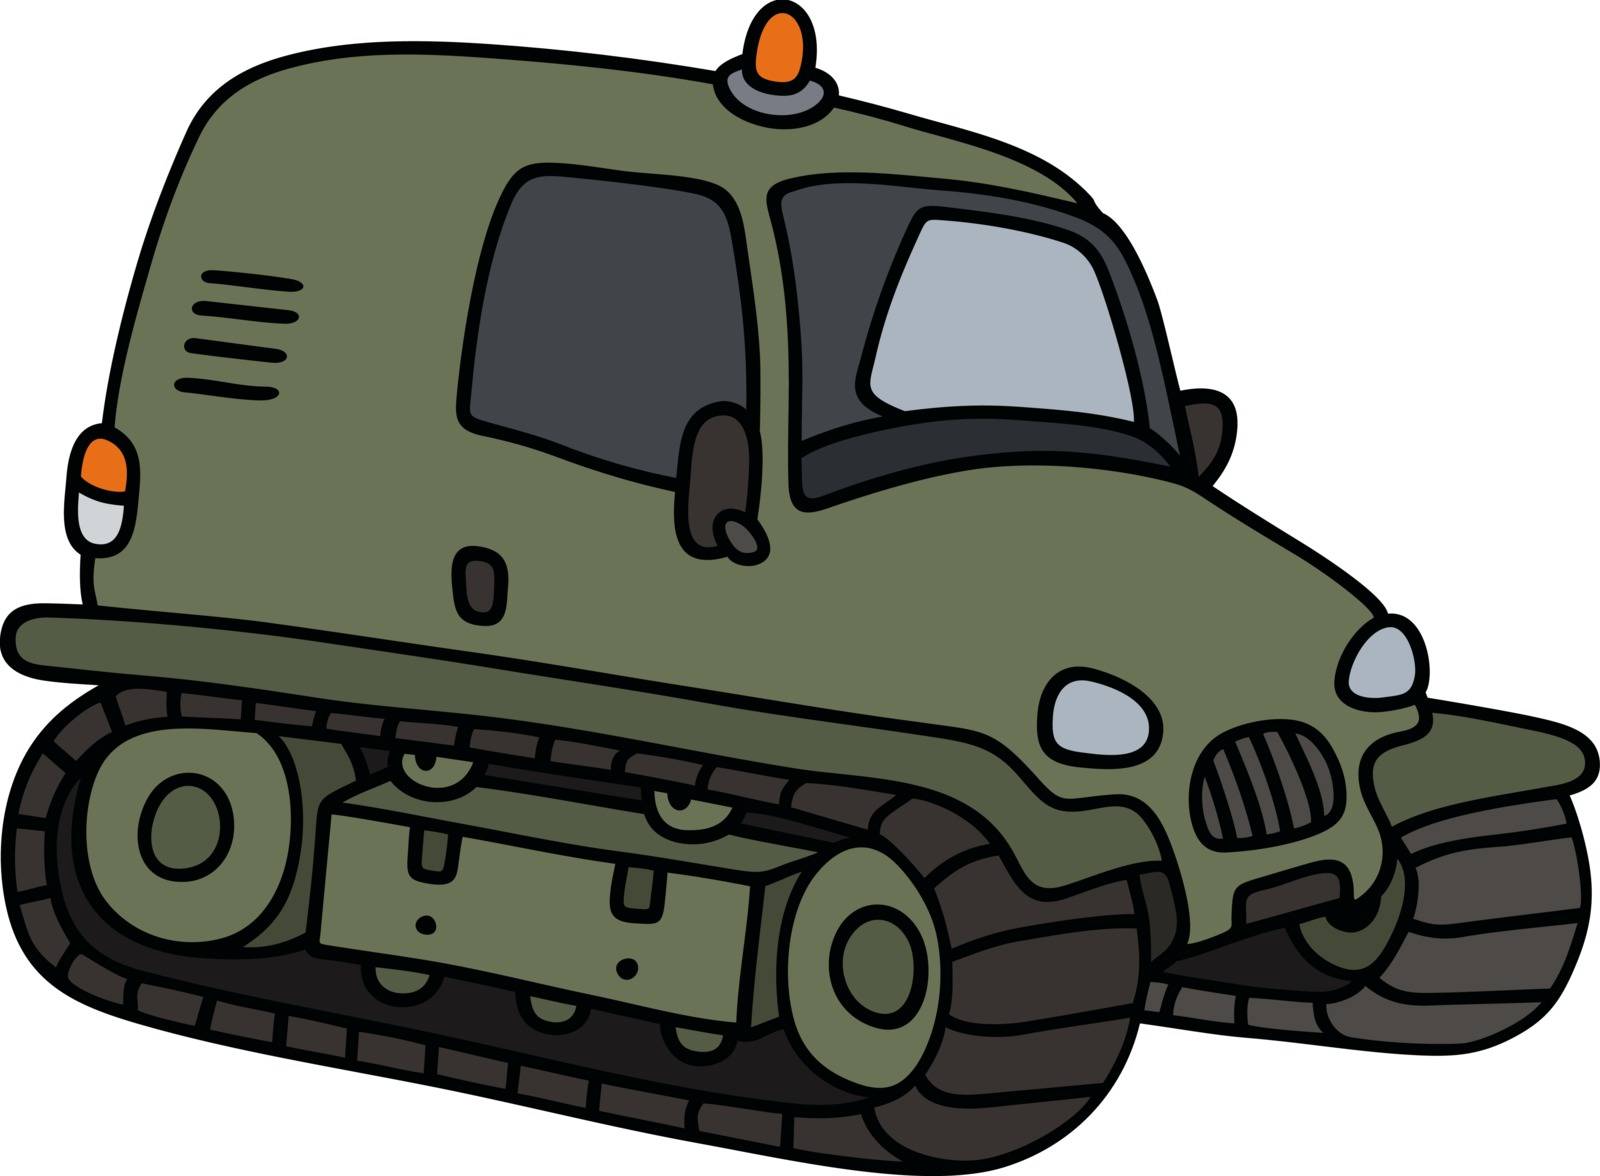 Green tracked vehicle by vostal